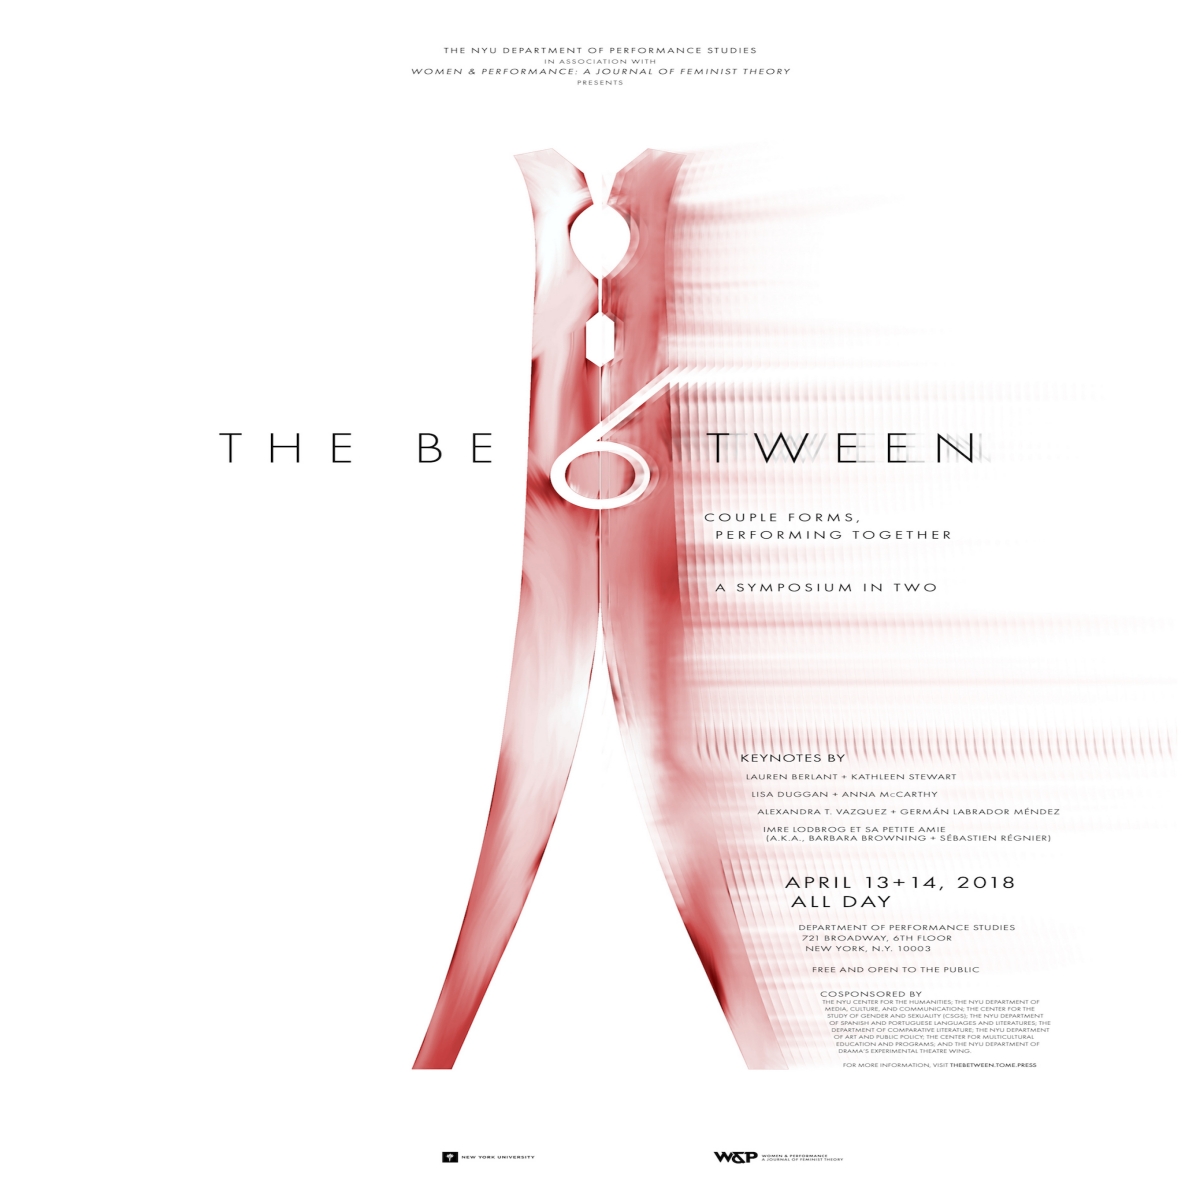 The Between: Couple Forms, Performing Together